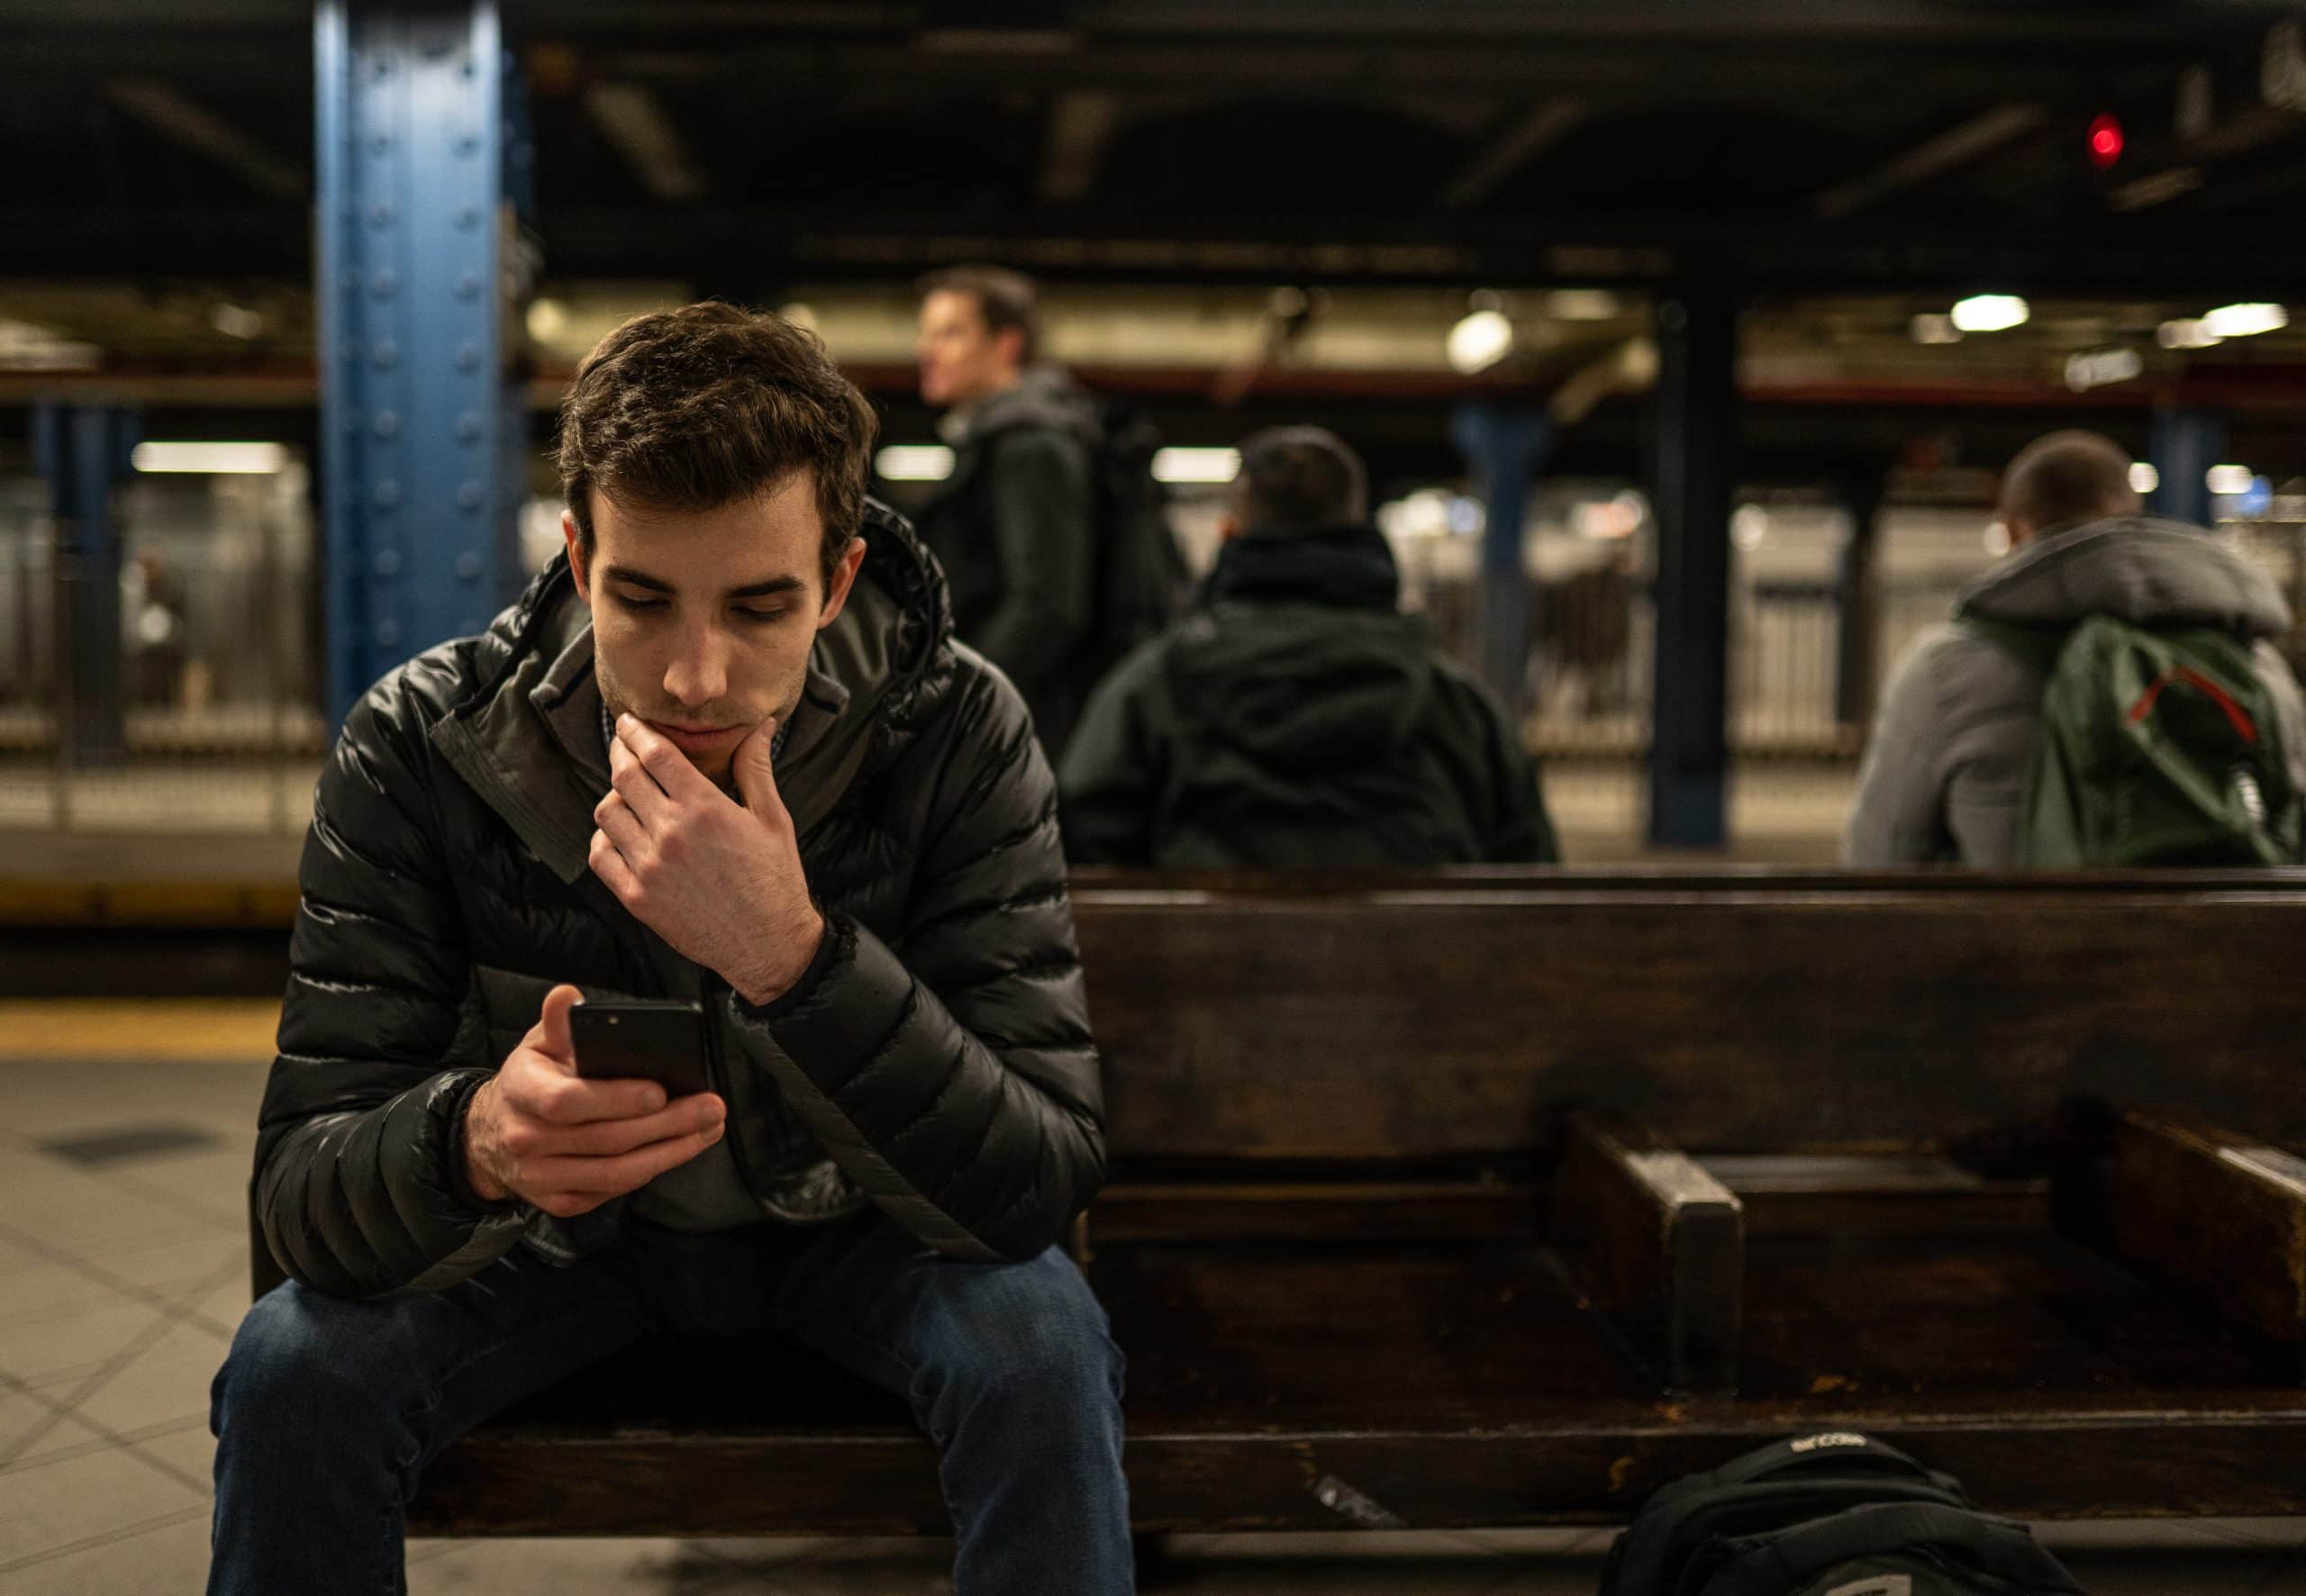 Man looking at his phone while sitting on a bench